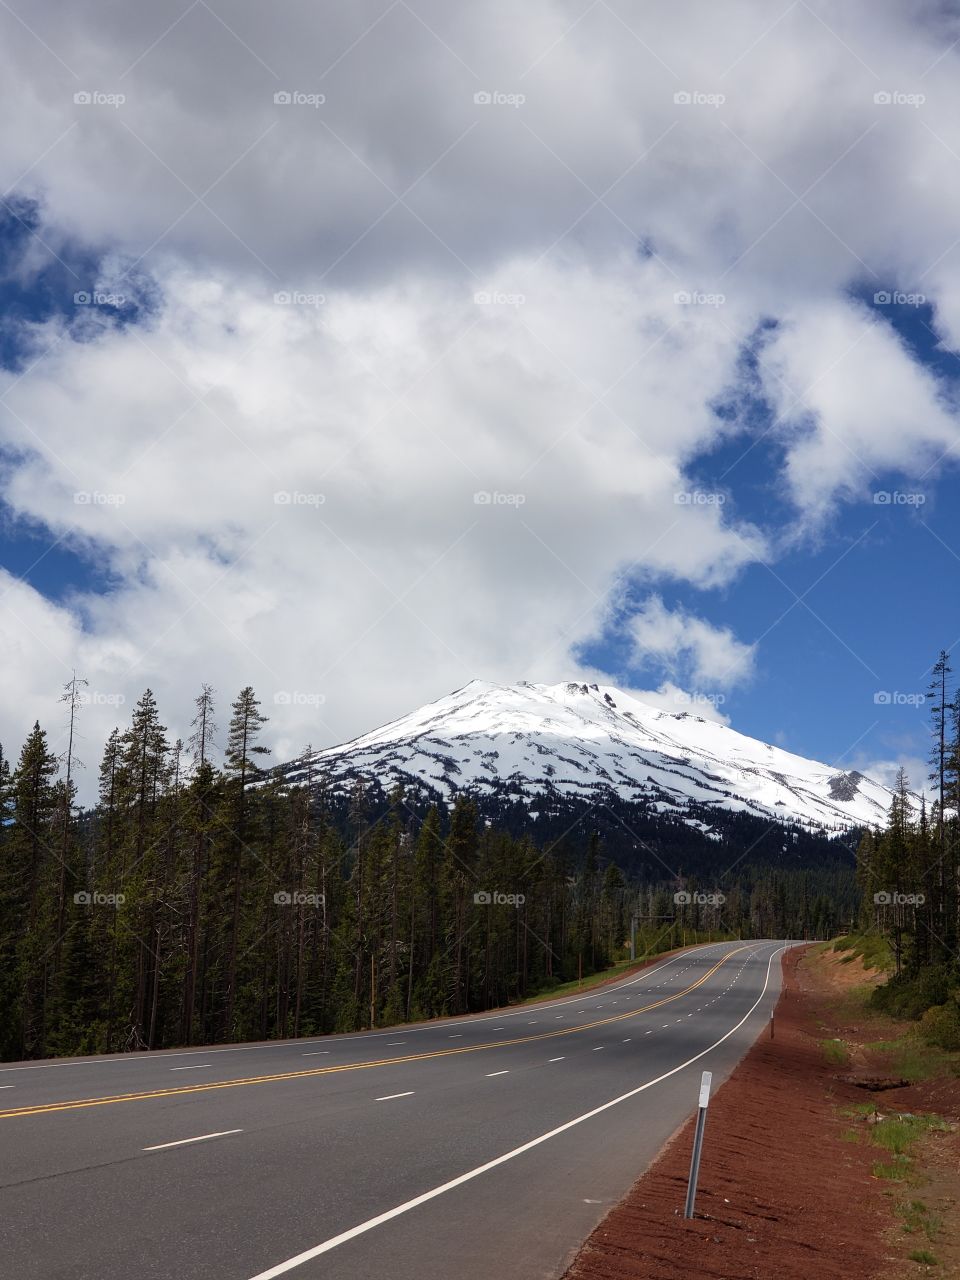 Summer road trip along Central Oregon's Cascade Lakes Highway with a view of the sun breaking through the clouds and illuminating the snow covered Mt. Bachelor.